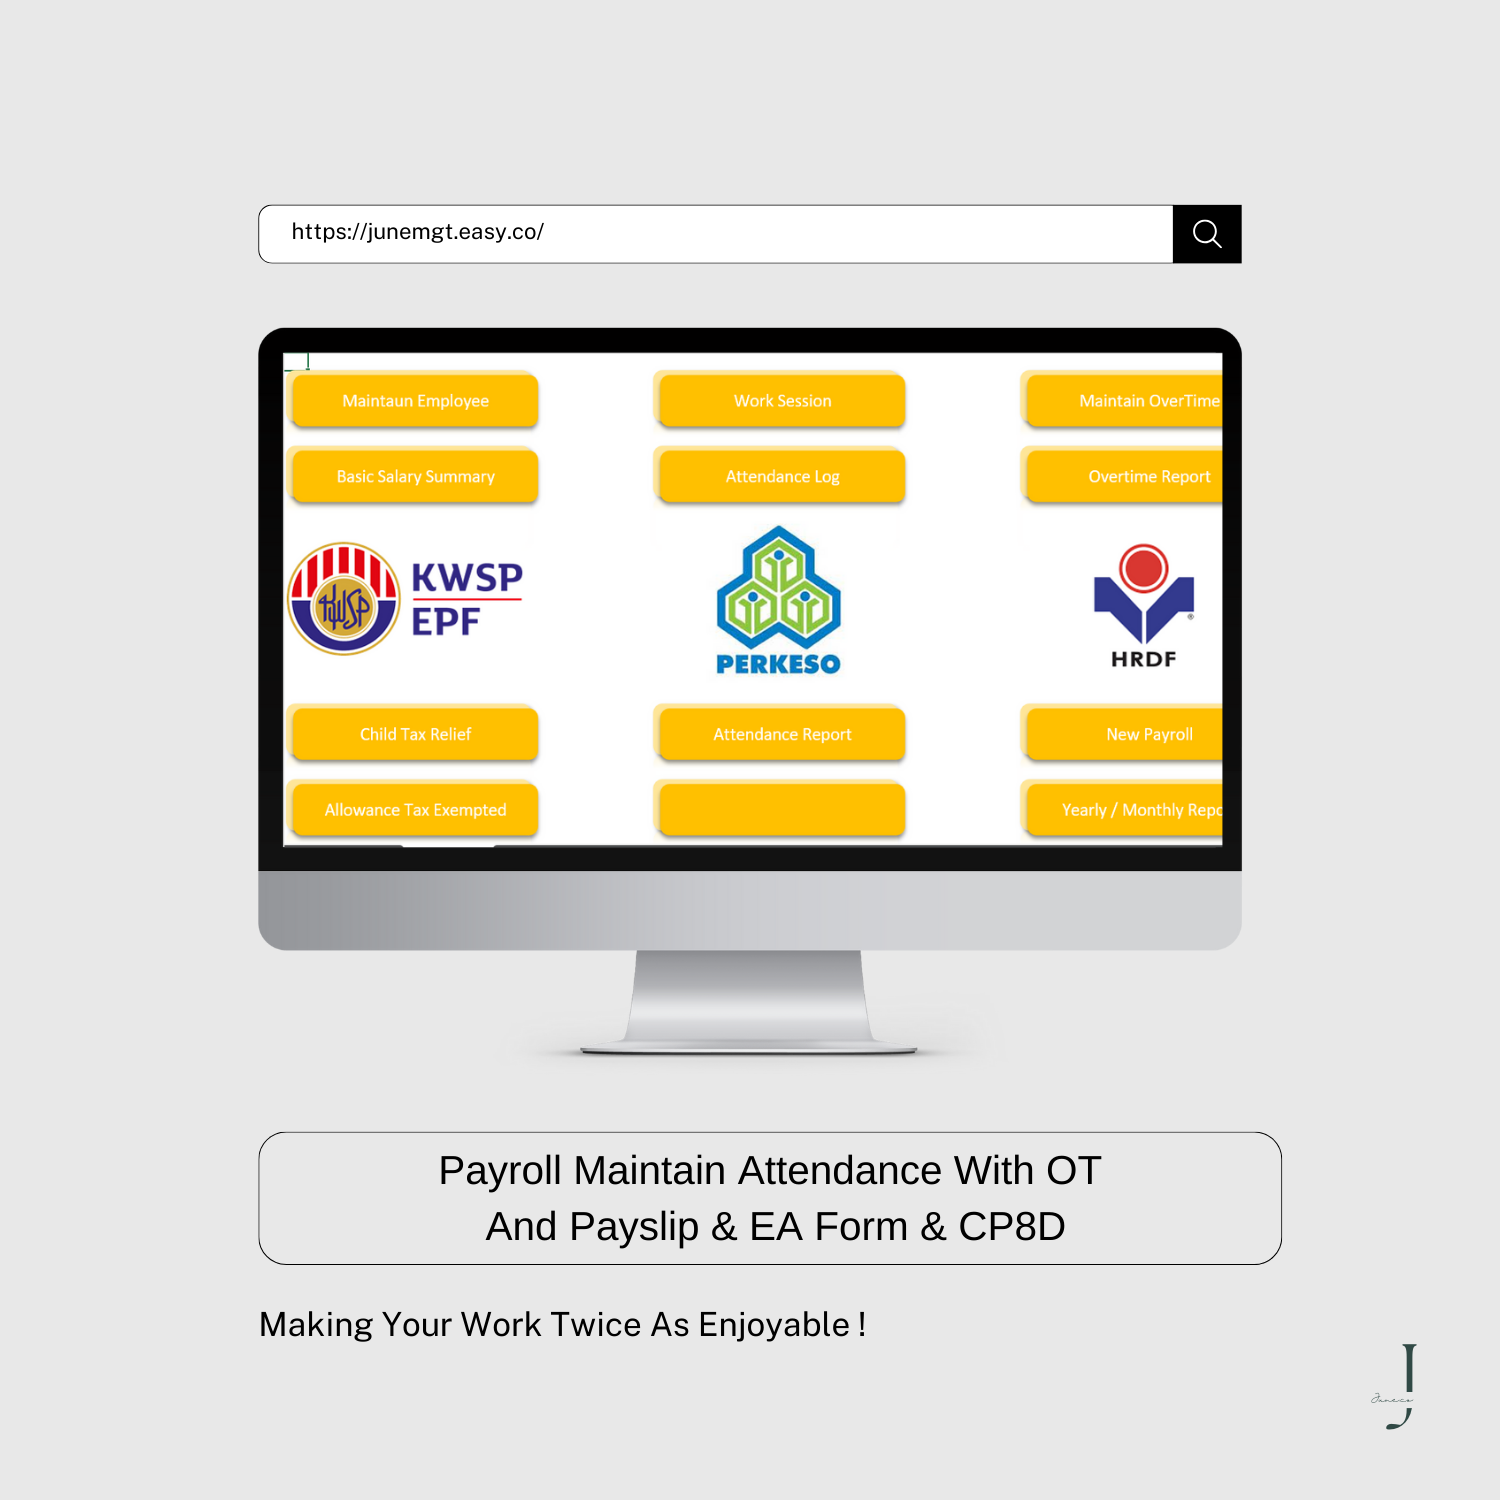 Payroll Maintain Attendance With Ot And Payslip & EA Form & CP8D- PRODUCT